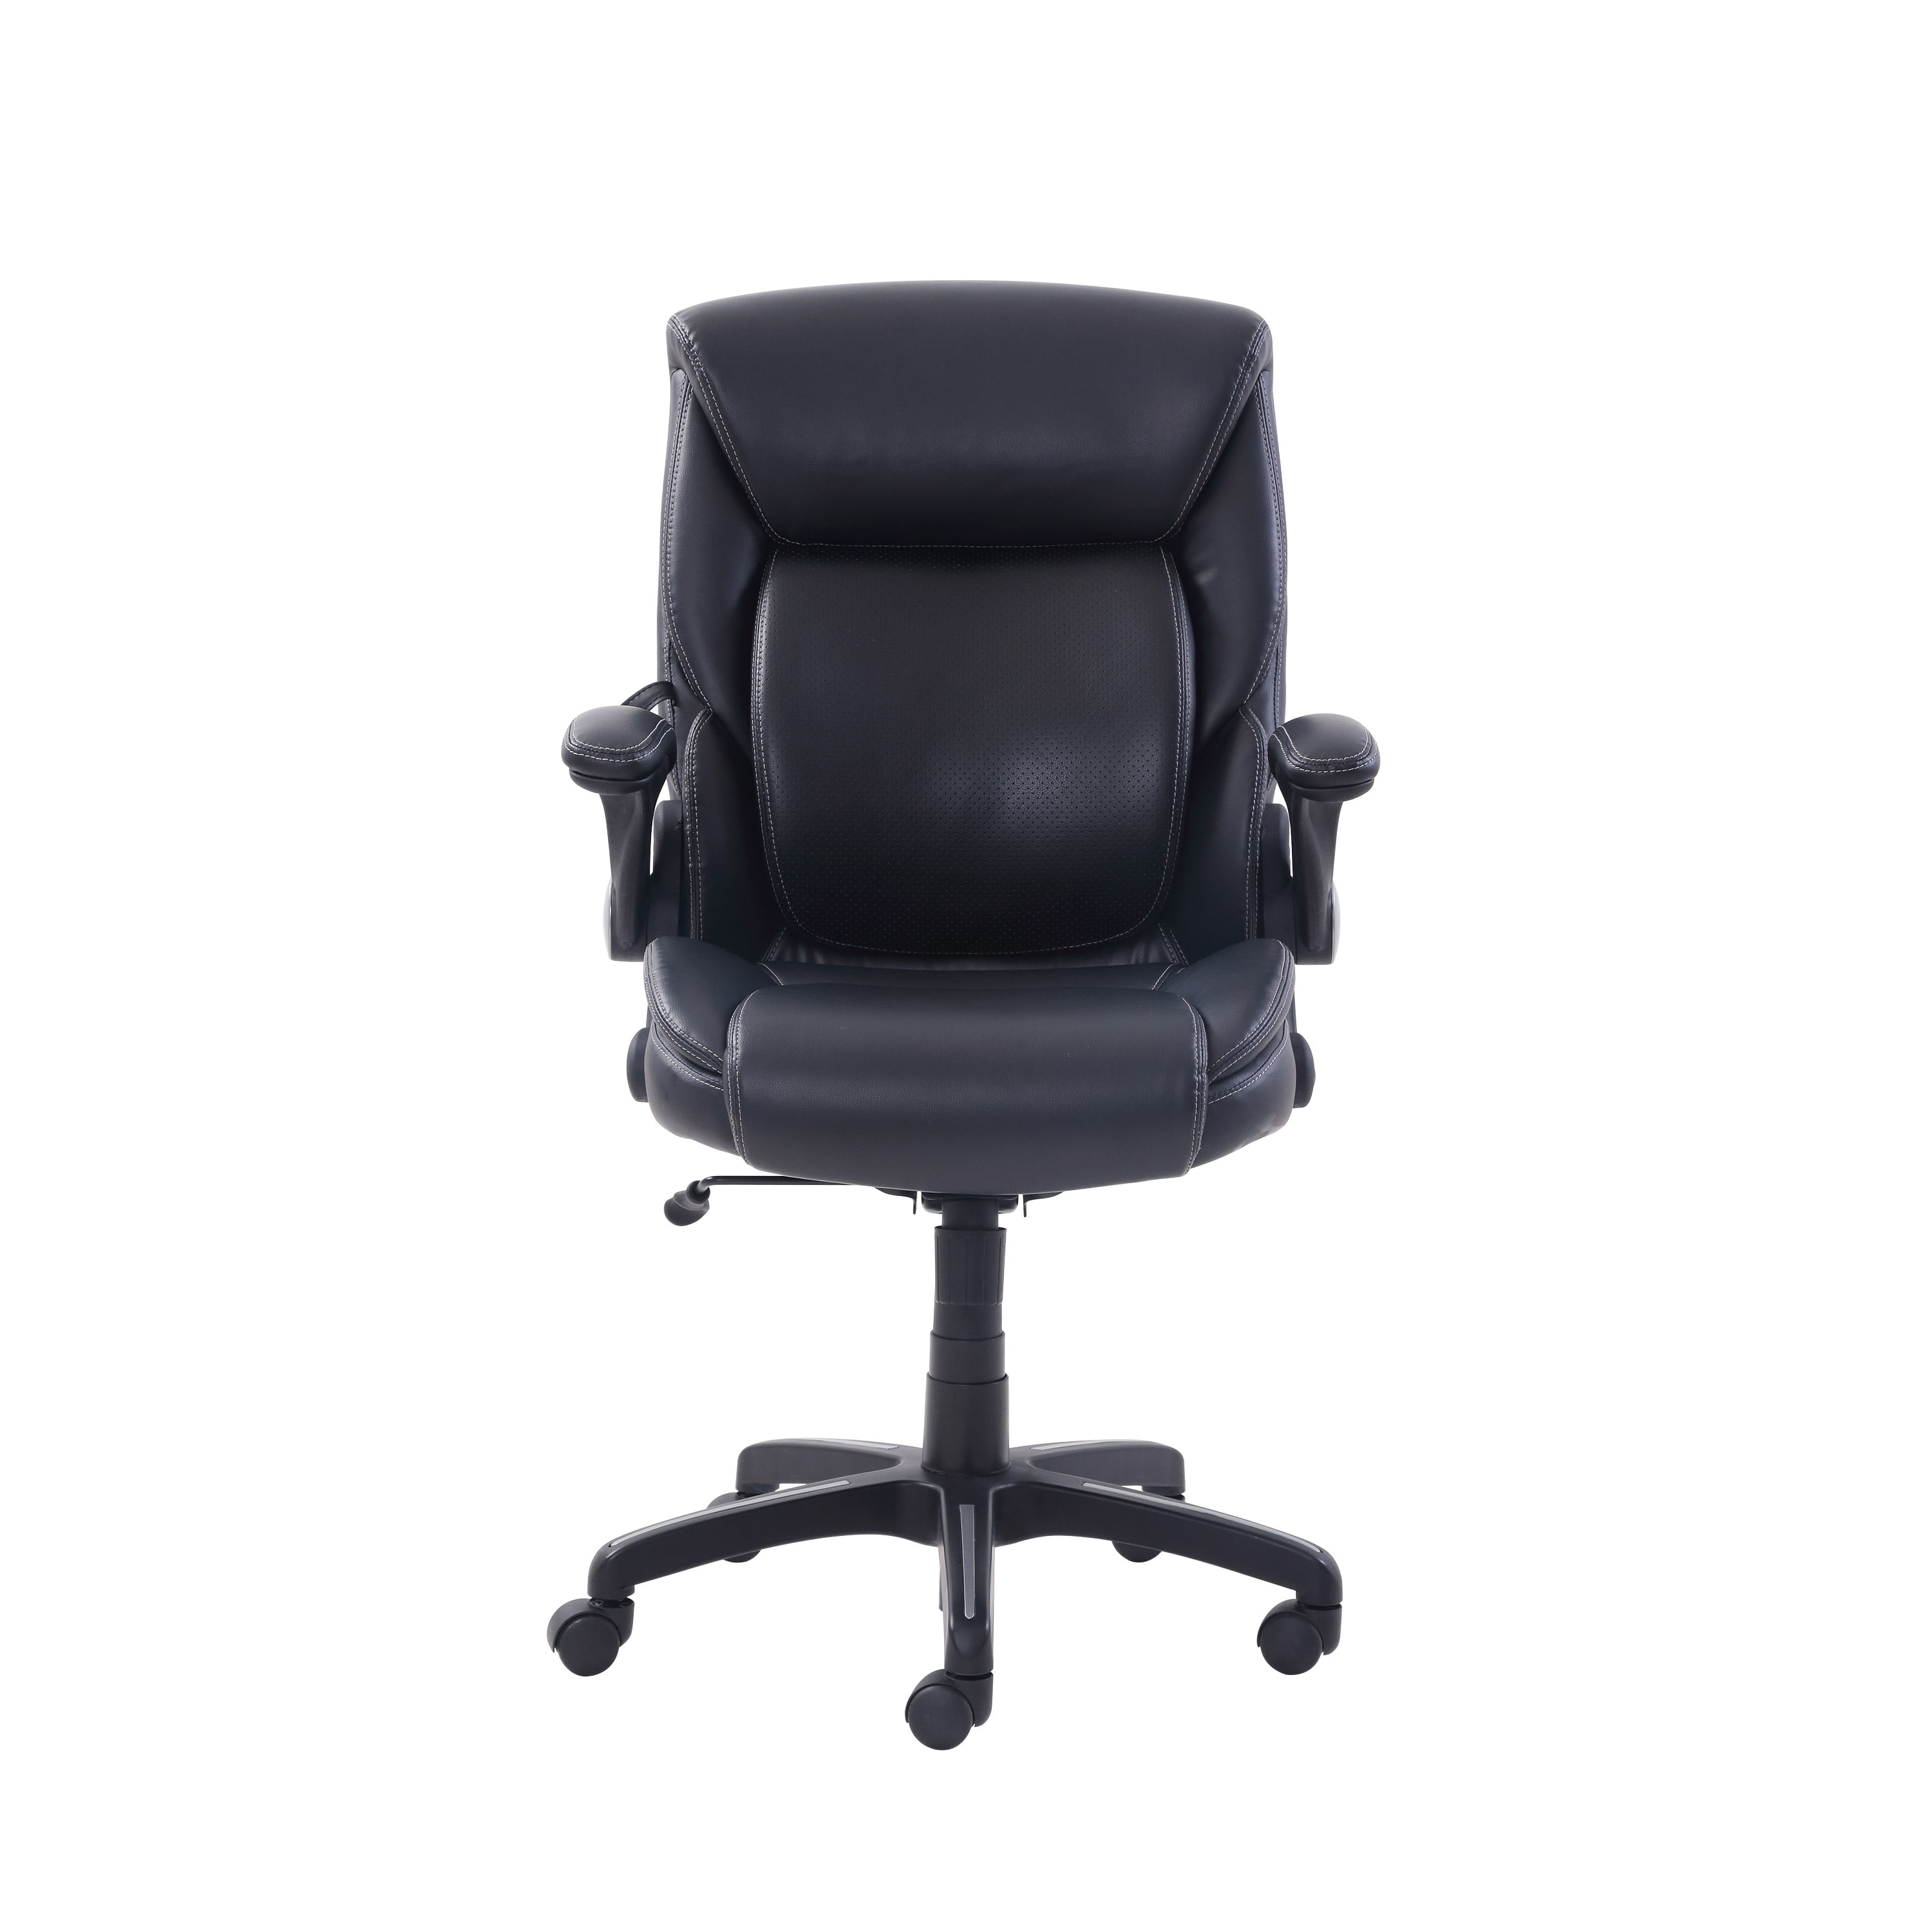 Serta Air Lumbar Bonded Leather Manager Office Chair (Black) $99 + Free Shipping